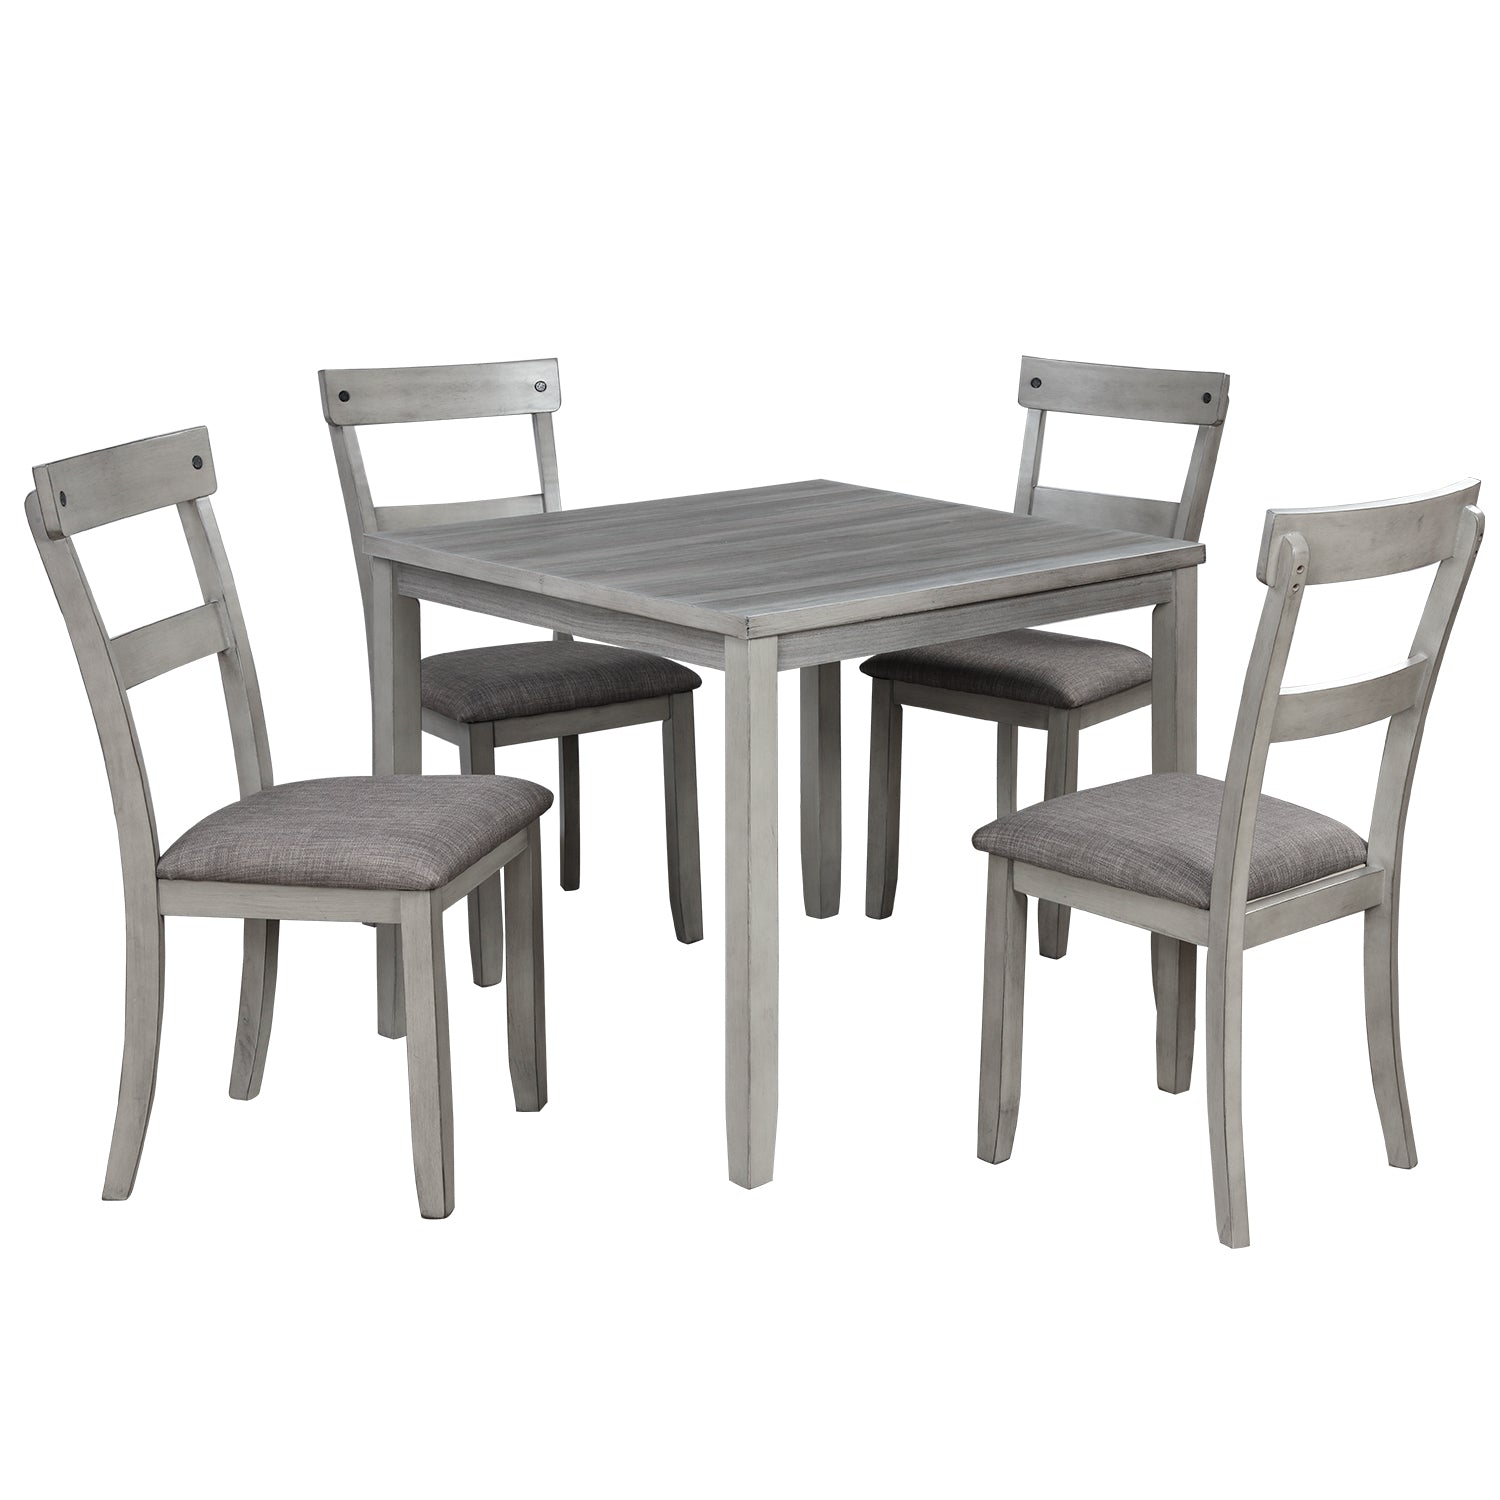 5 Piece Dining Table Set Industrial Wooden Kitchen Table and 4 Chairs for Dining Room (Light Grey)-Boyel Living